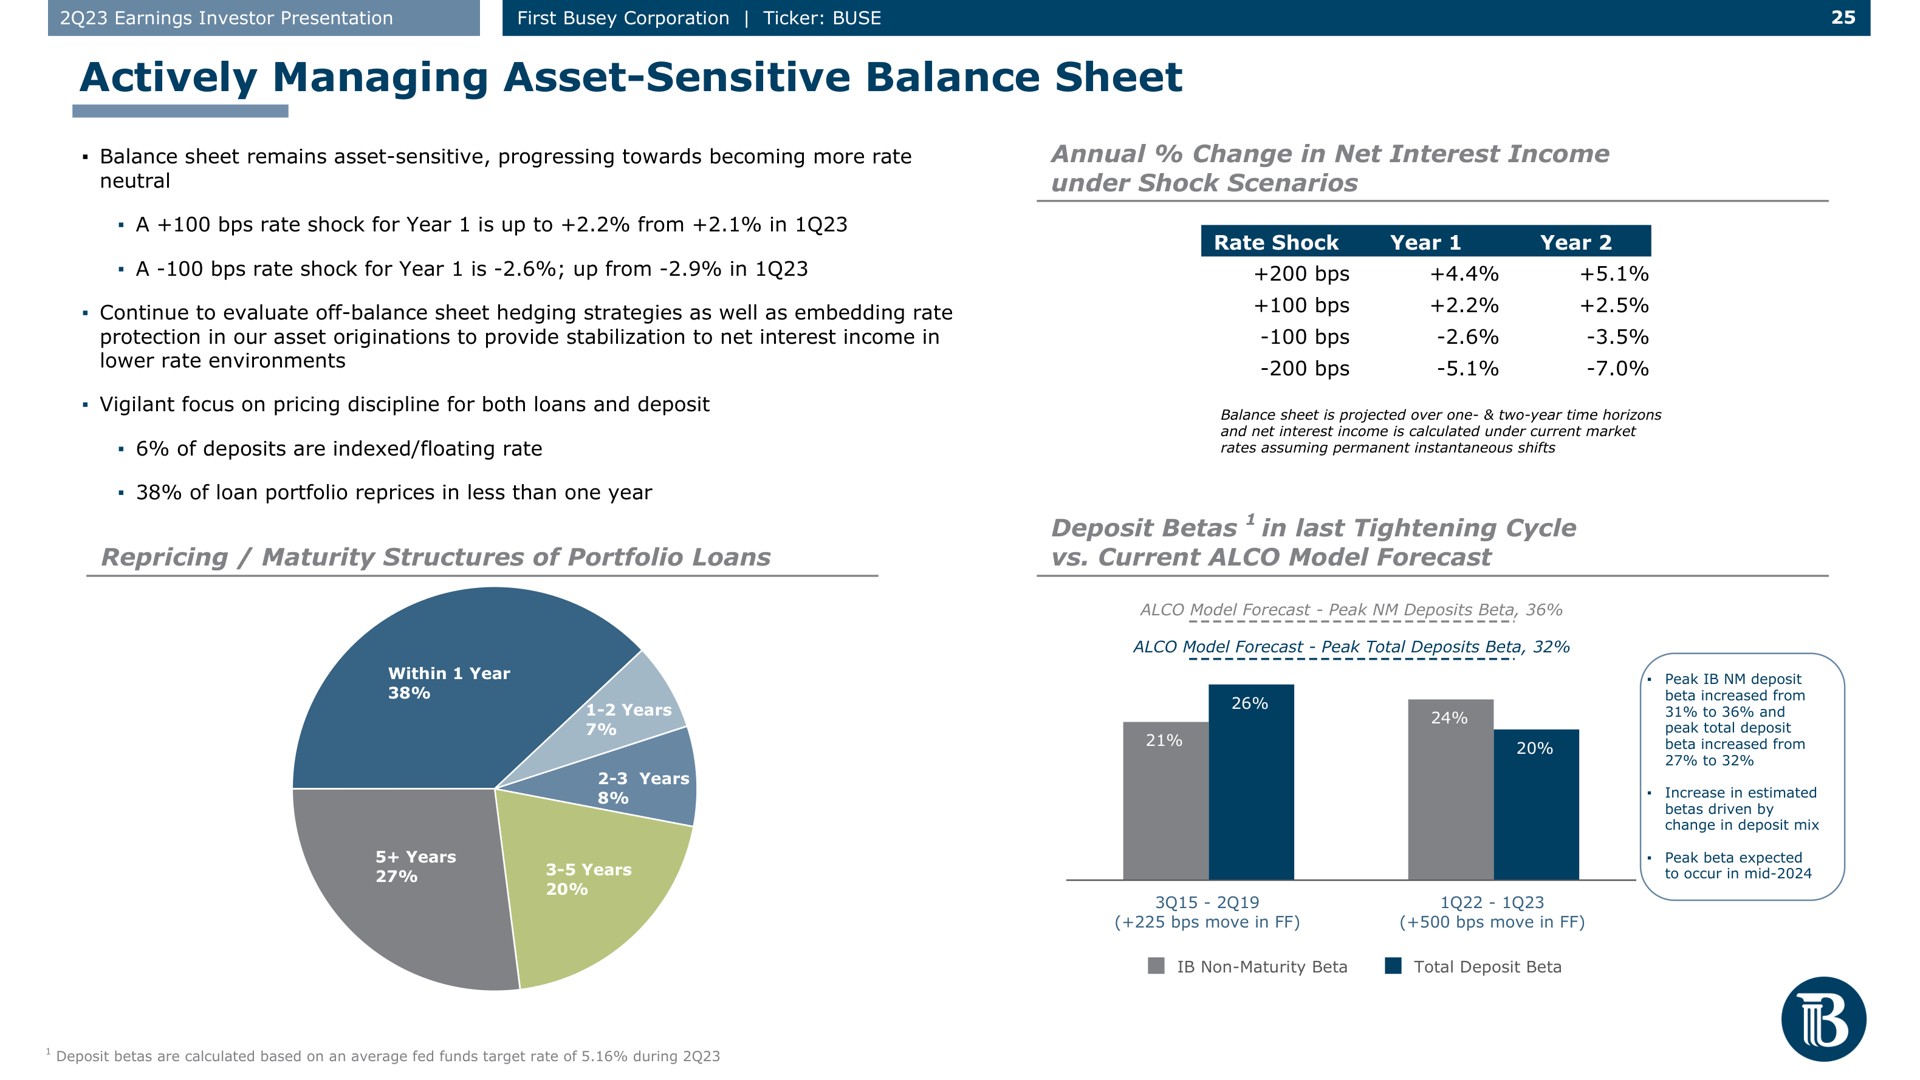 actively managing asset sensitive balance sheet annual change in net interest income under shock scenarios maturity structures of portfolio loans deposit betas in last tightening cycle current alco model forecast | First Busey